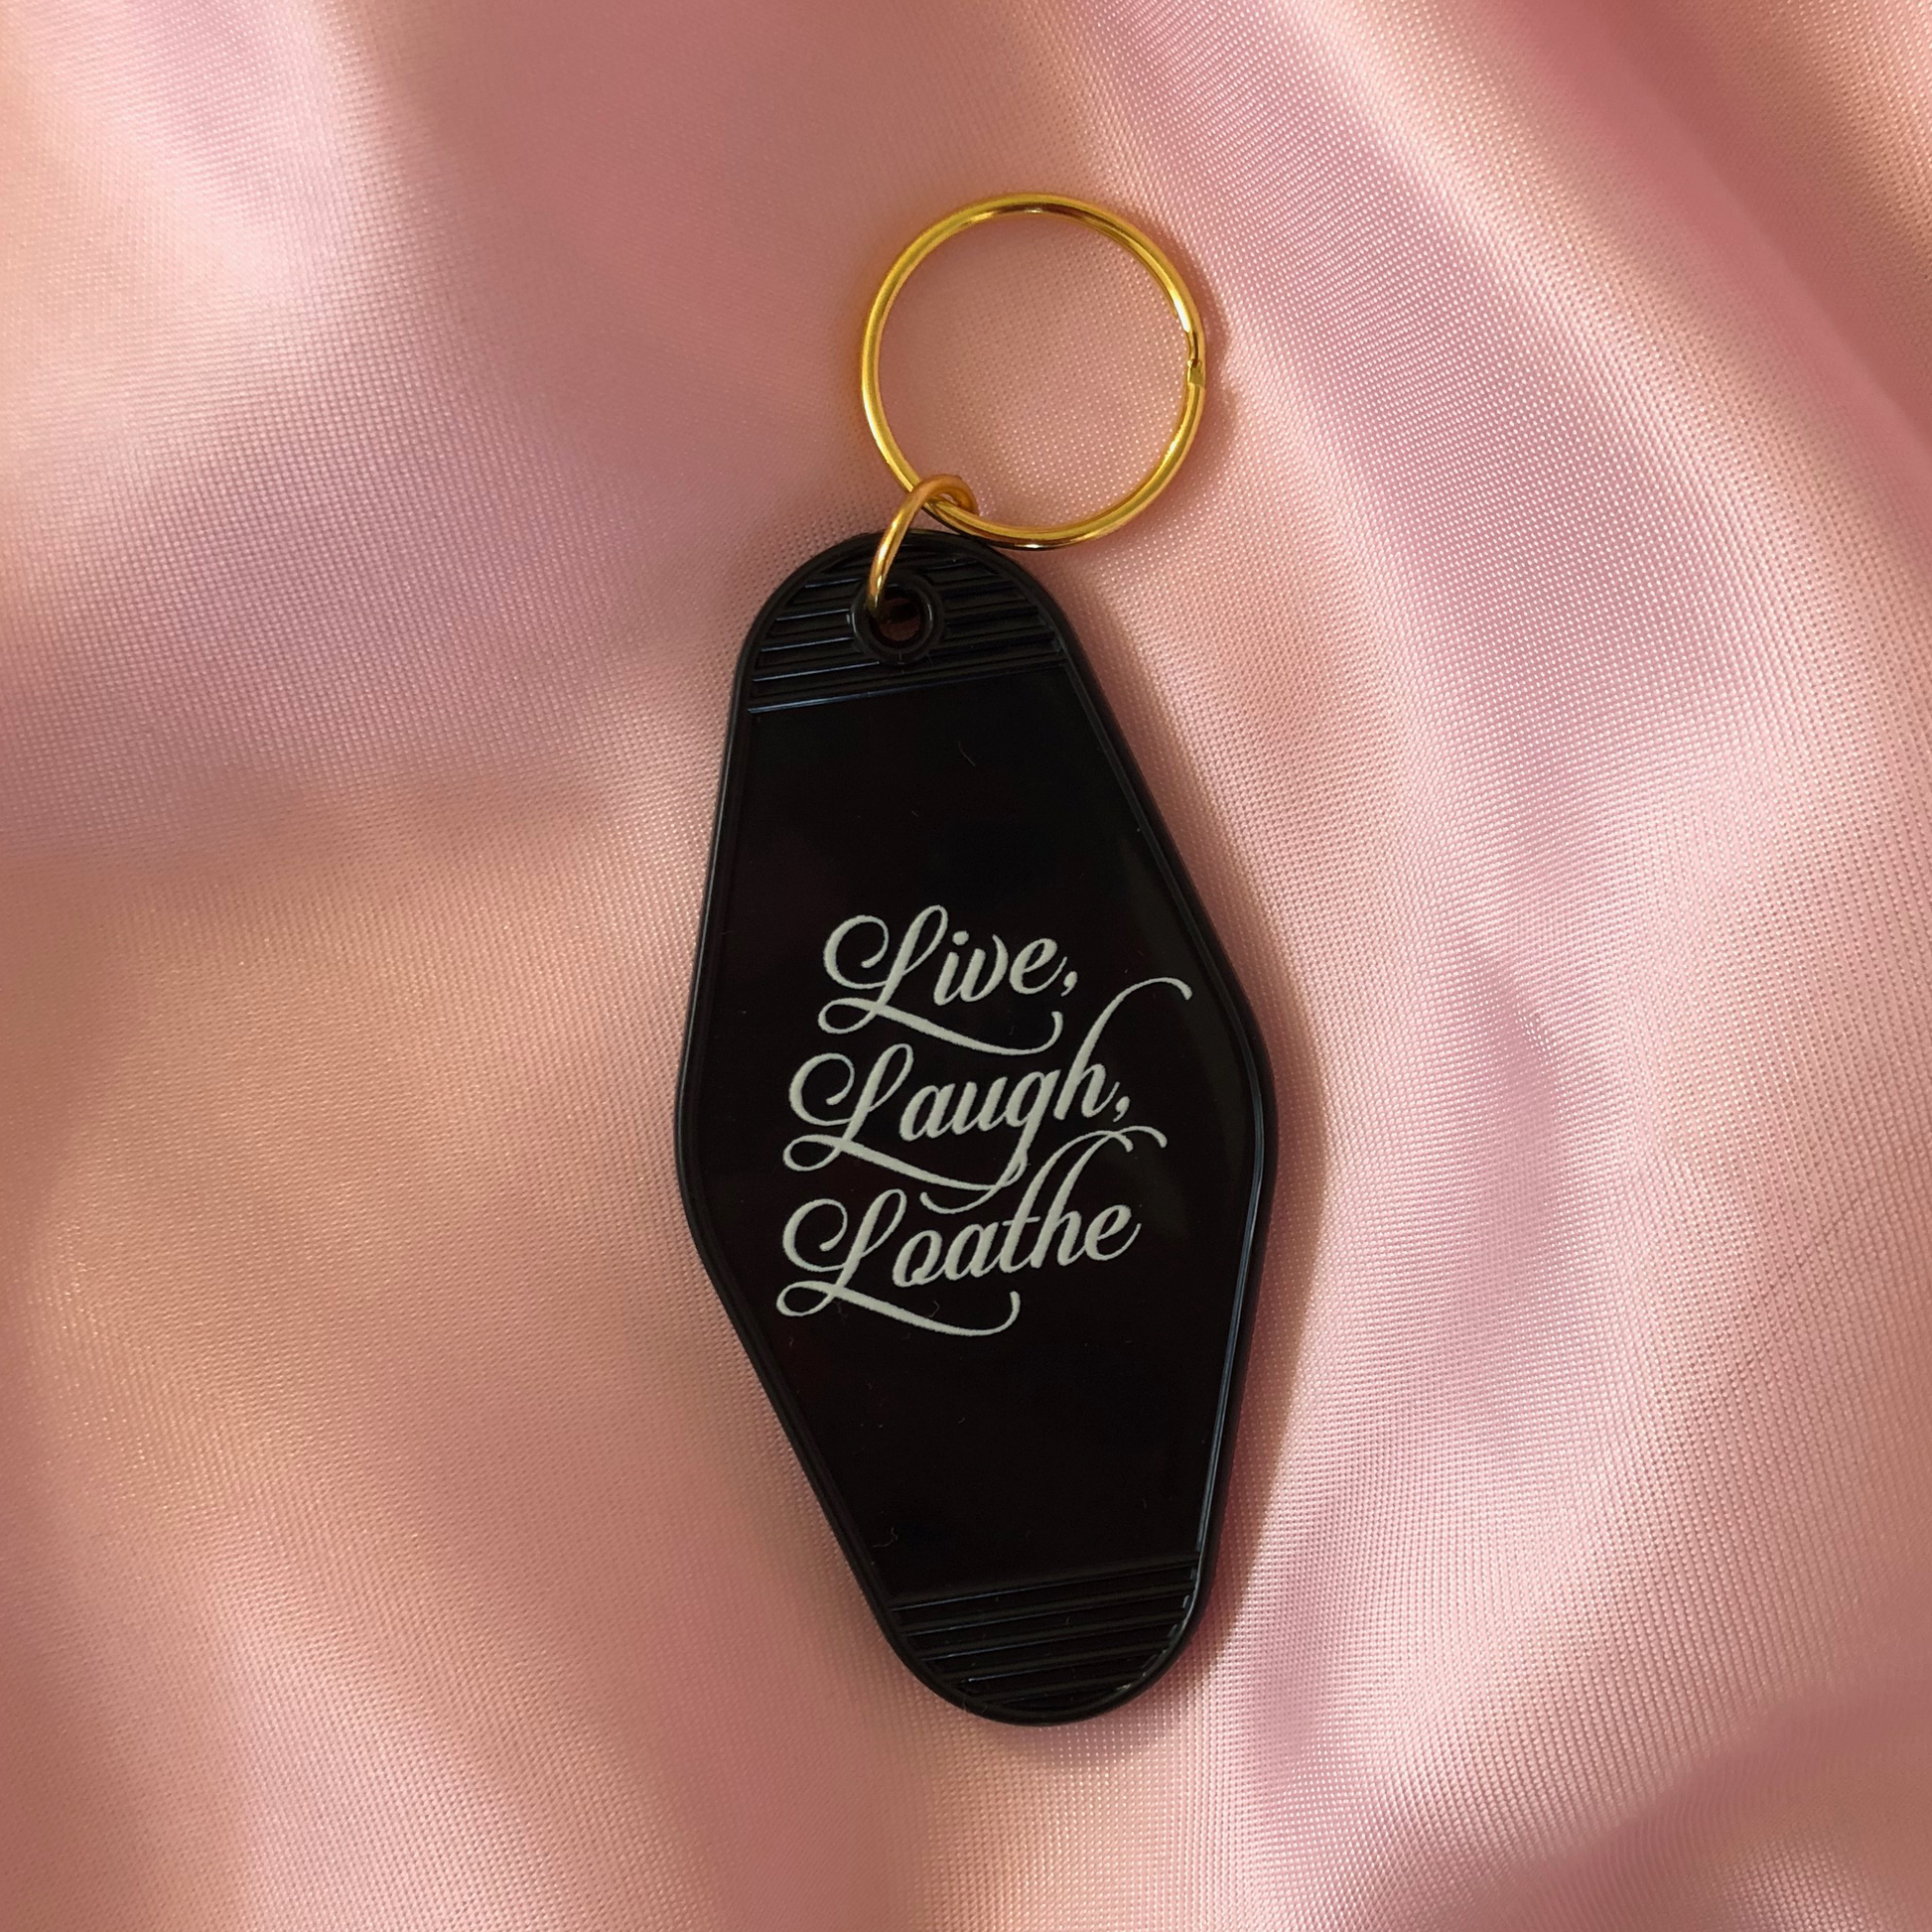 Live Laugh Loathe keychain - The Crowd Went Wild